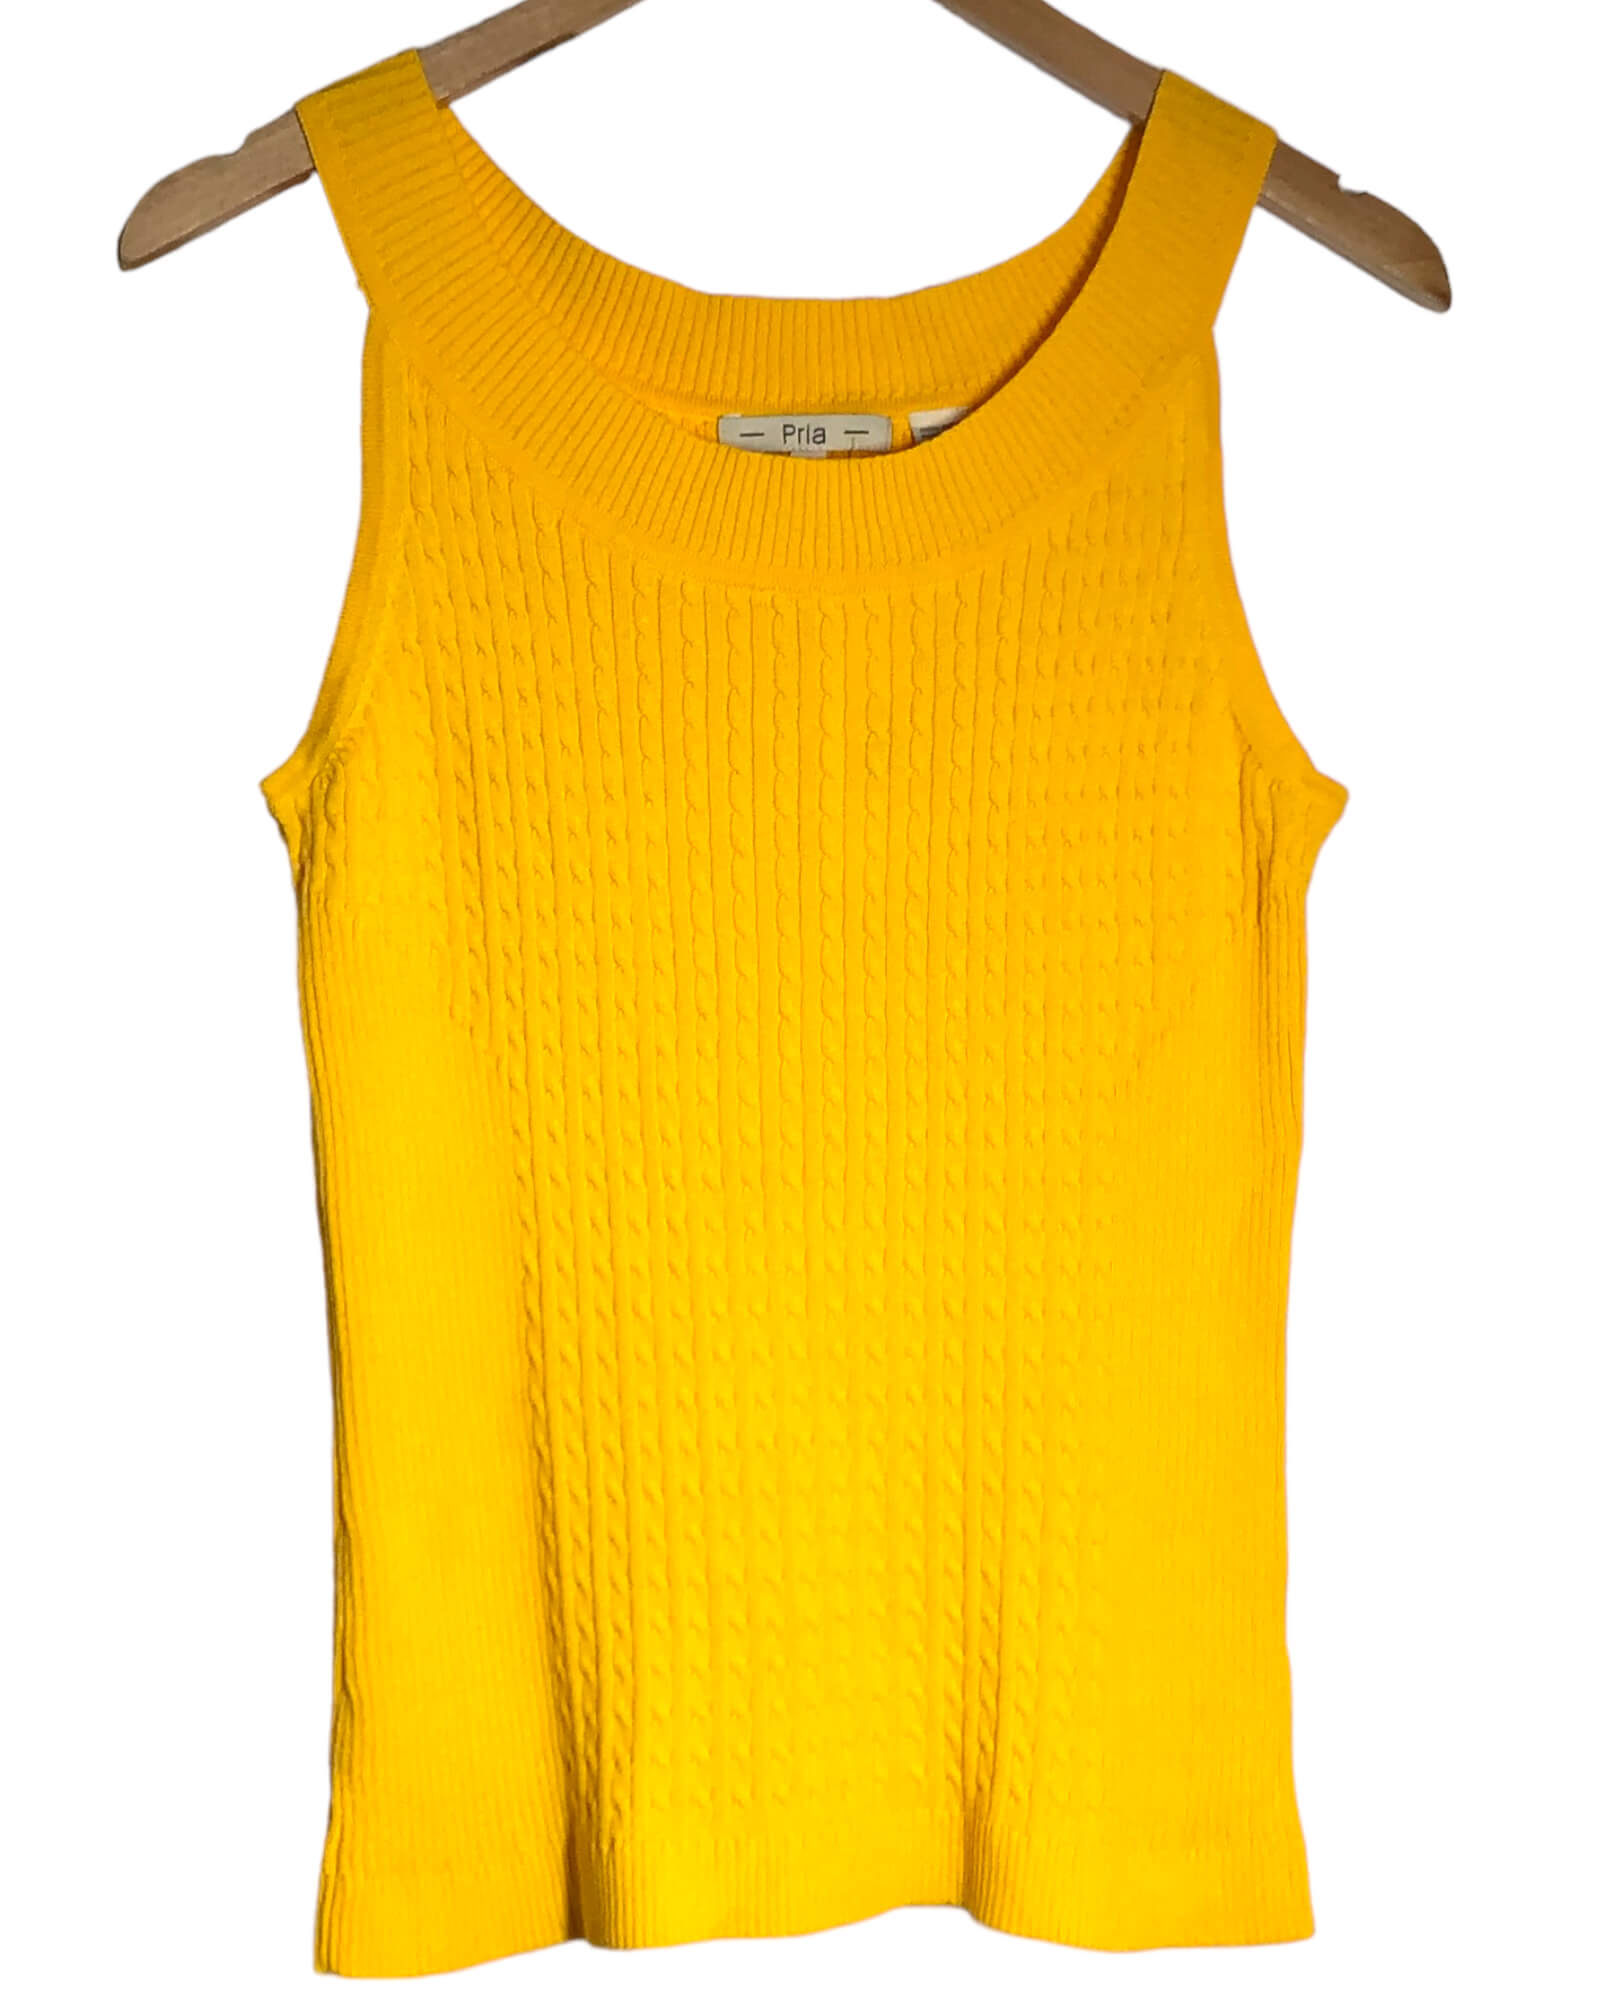 Bright Spring PRIA for MACY'S yellow sleeveless cable knit sweater 